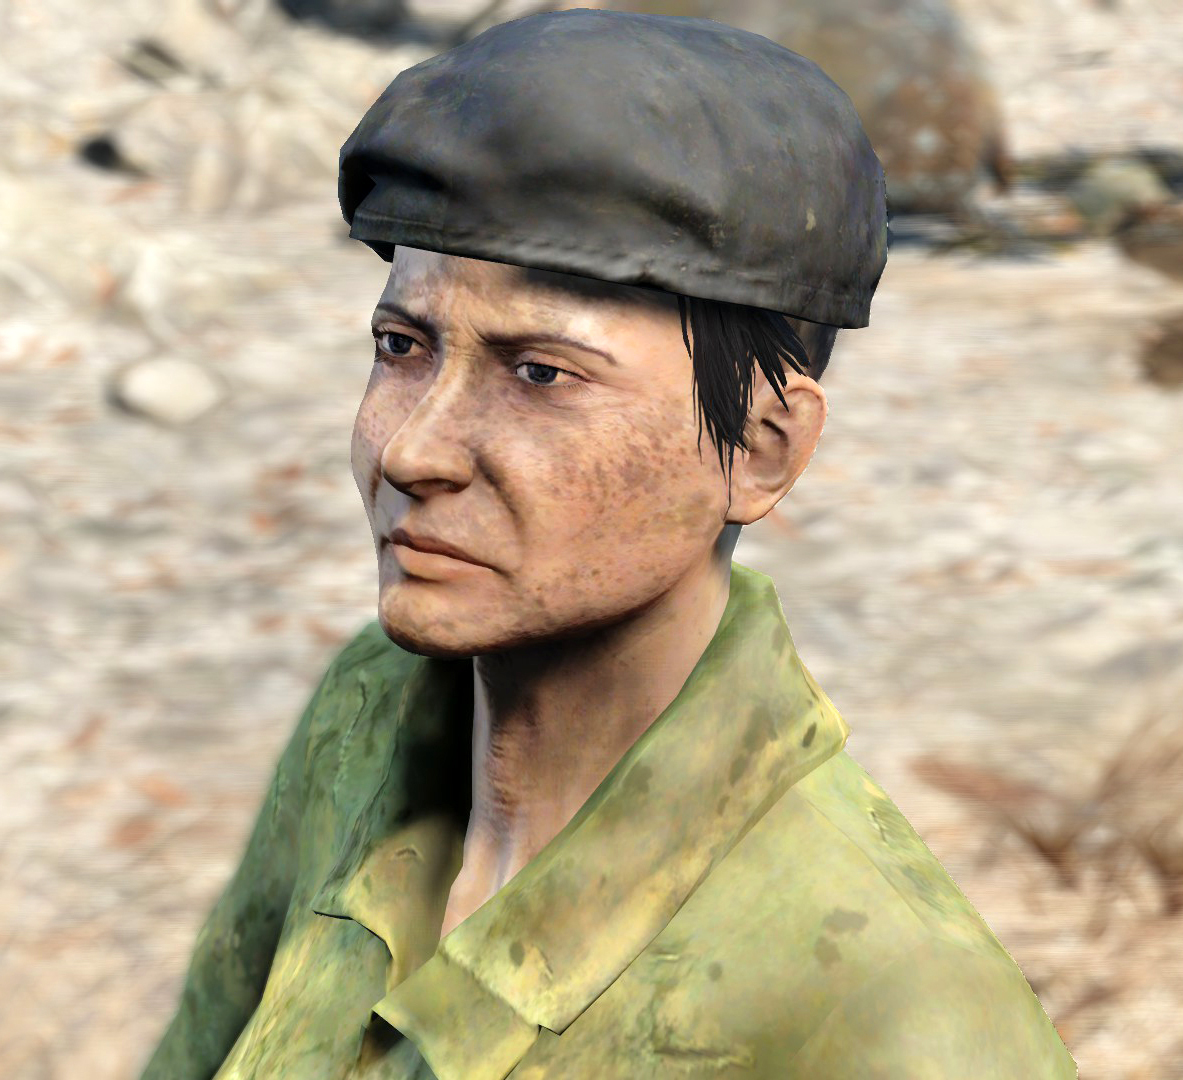 fallout 4 ronnie shaw id - fallout 4 ronnie shaw quest